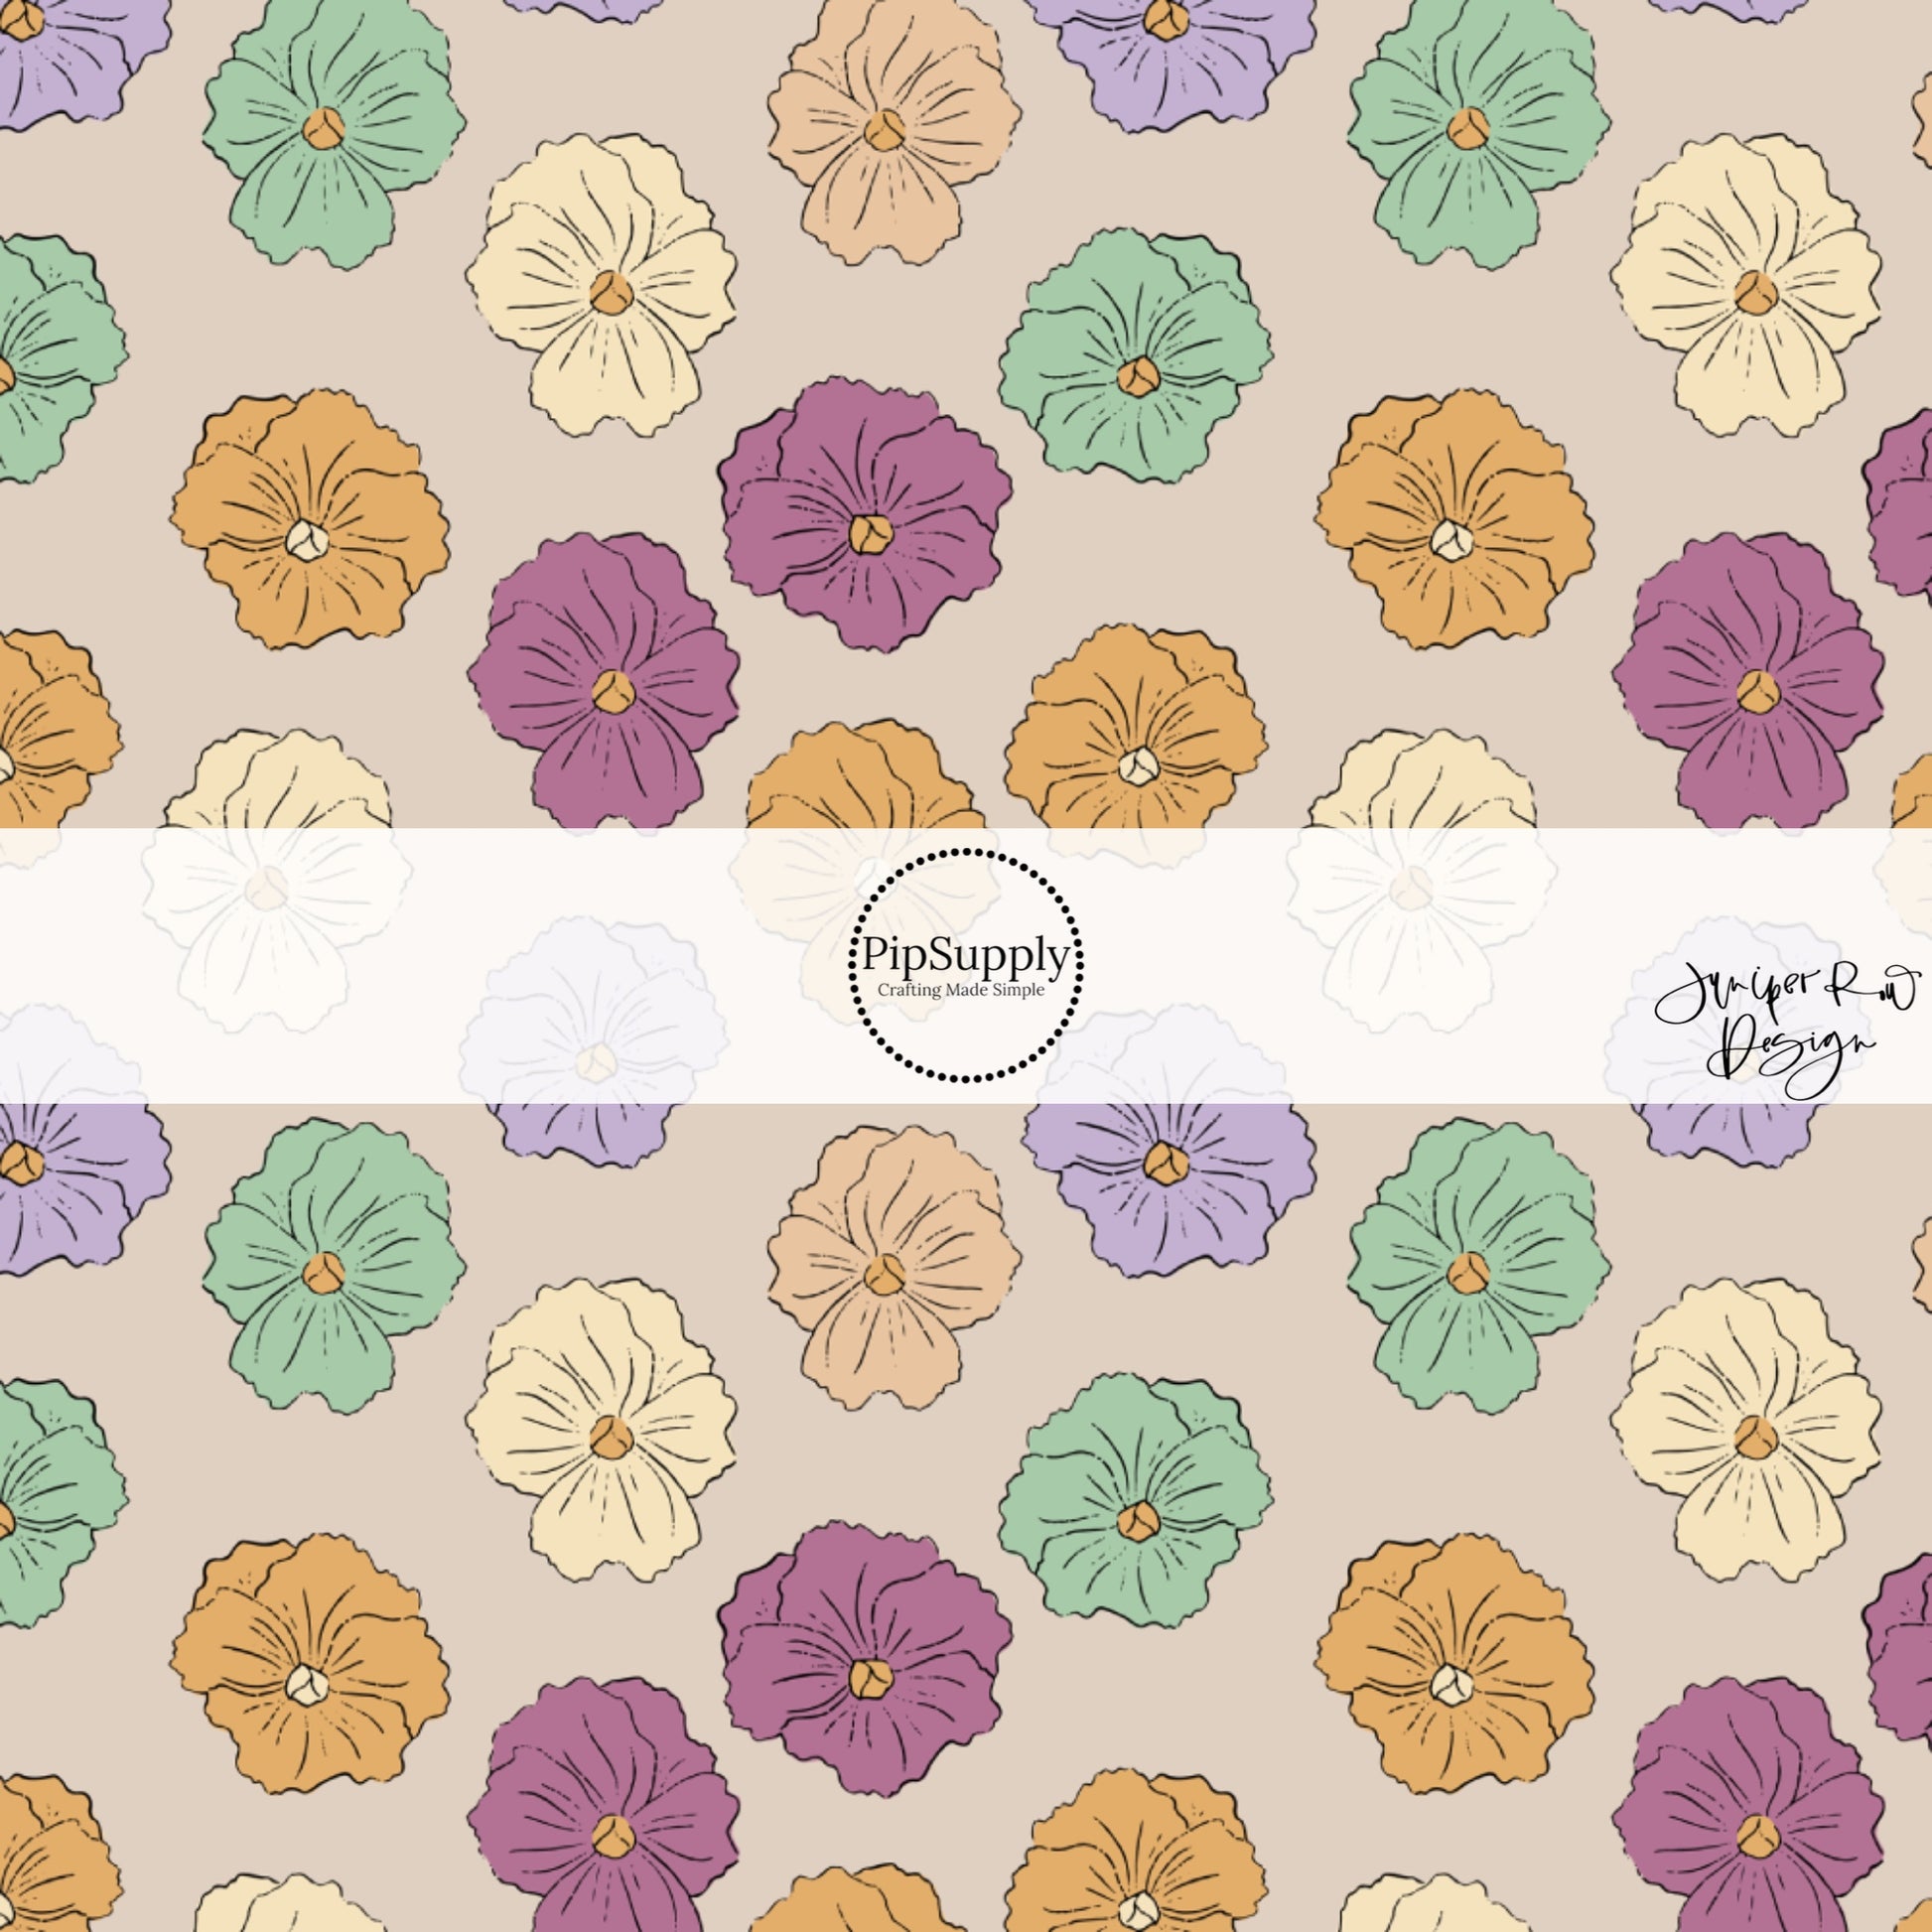 These floral themed light cream fabric by the yard features lavender, dark pink, mint, cream, and orange flowers.